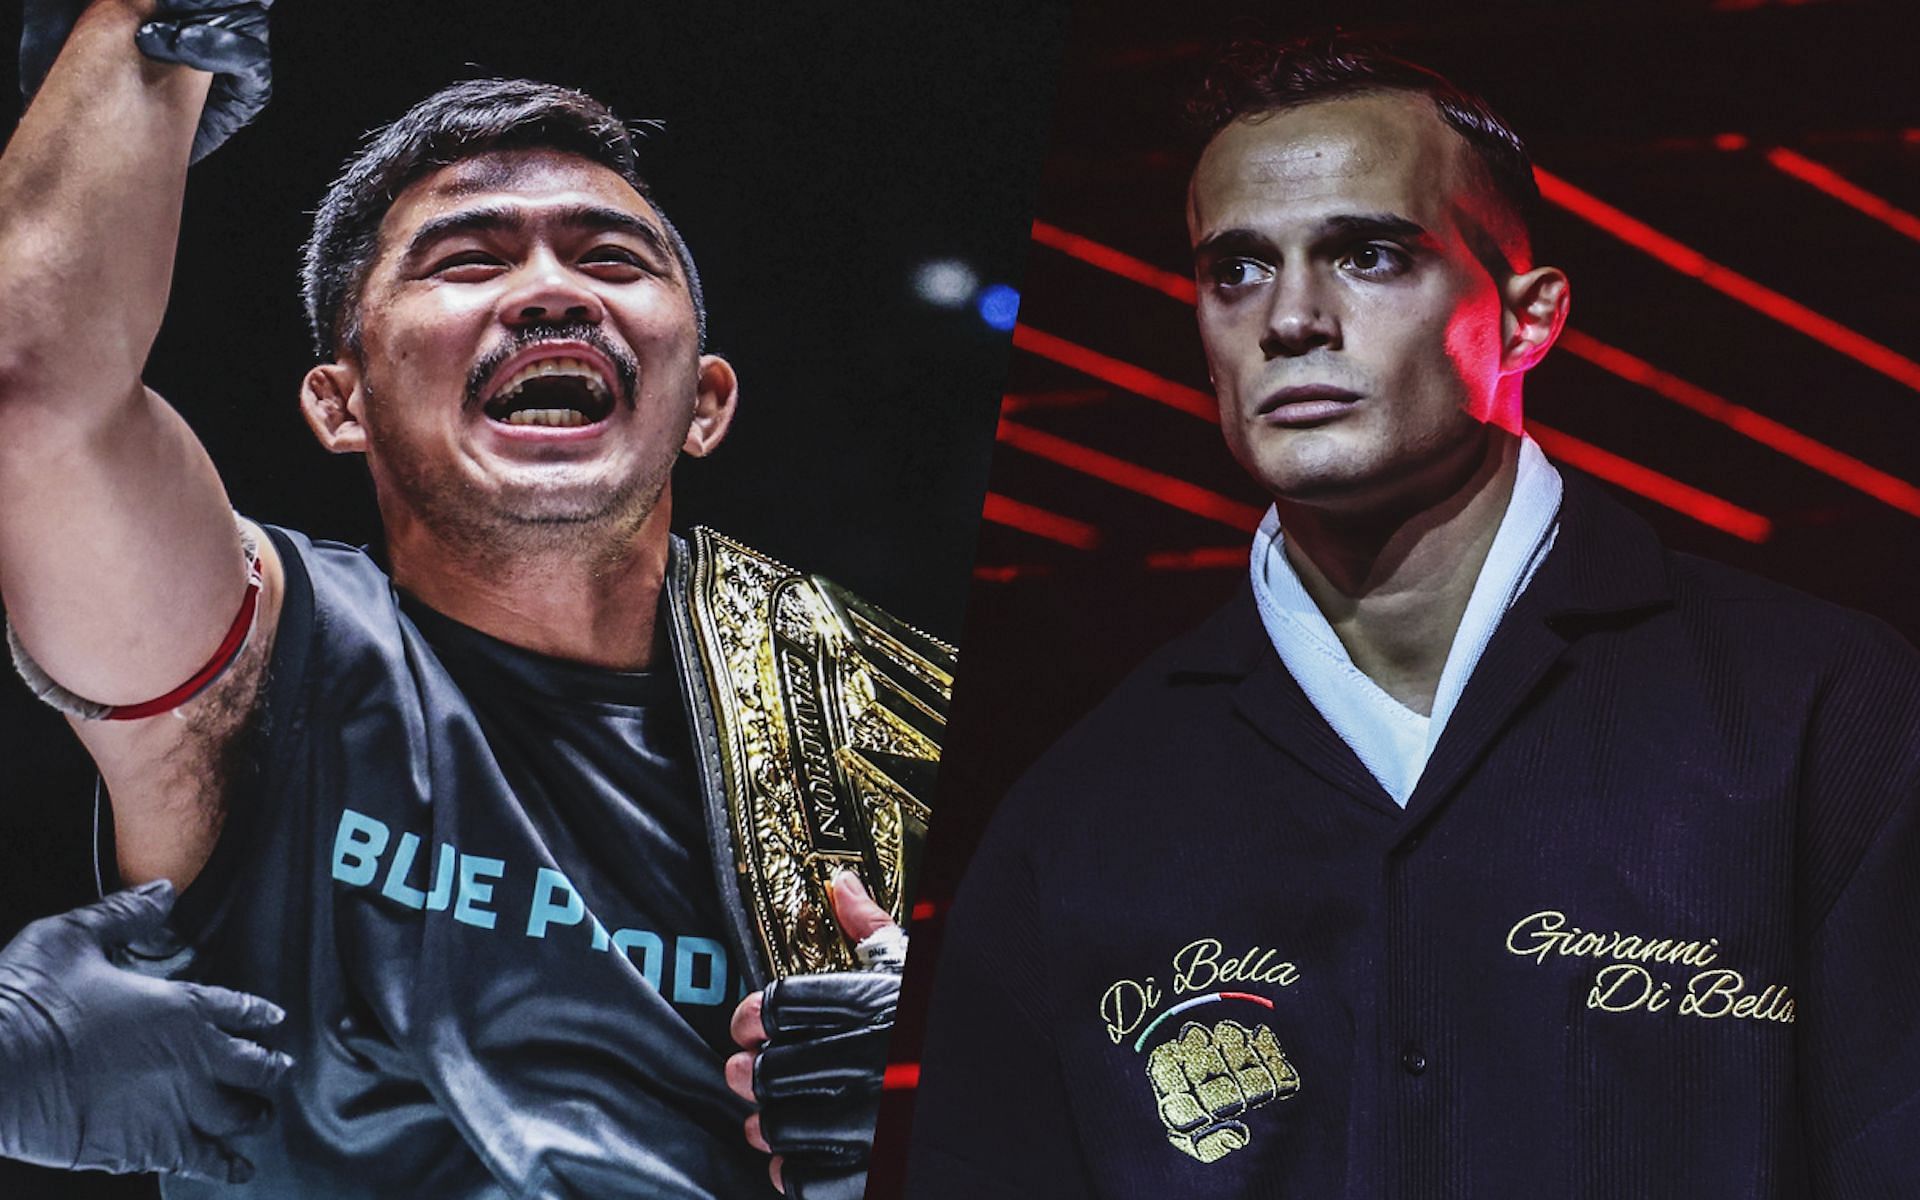 Prajanchai PK Saenchai (left) has several weapons to use against Jonathan Di Bella (right) in the main event of ONE Friday Fights 68.